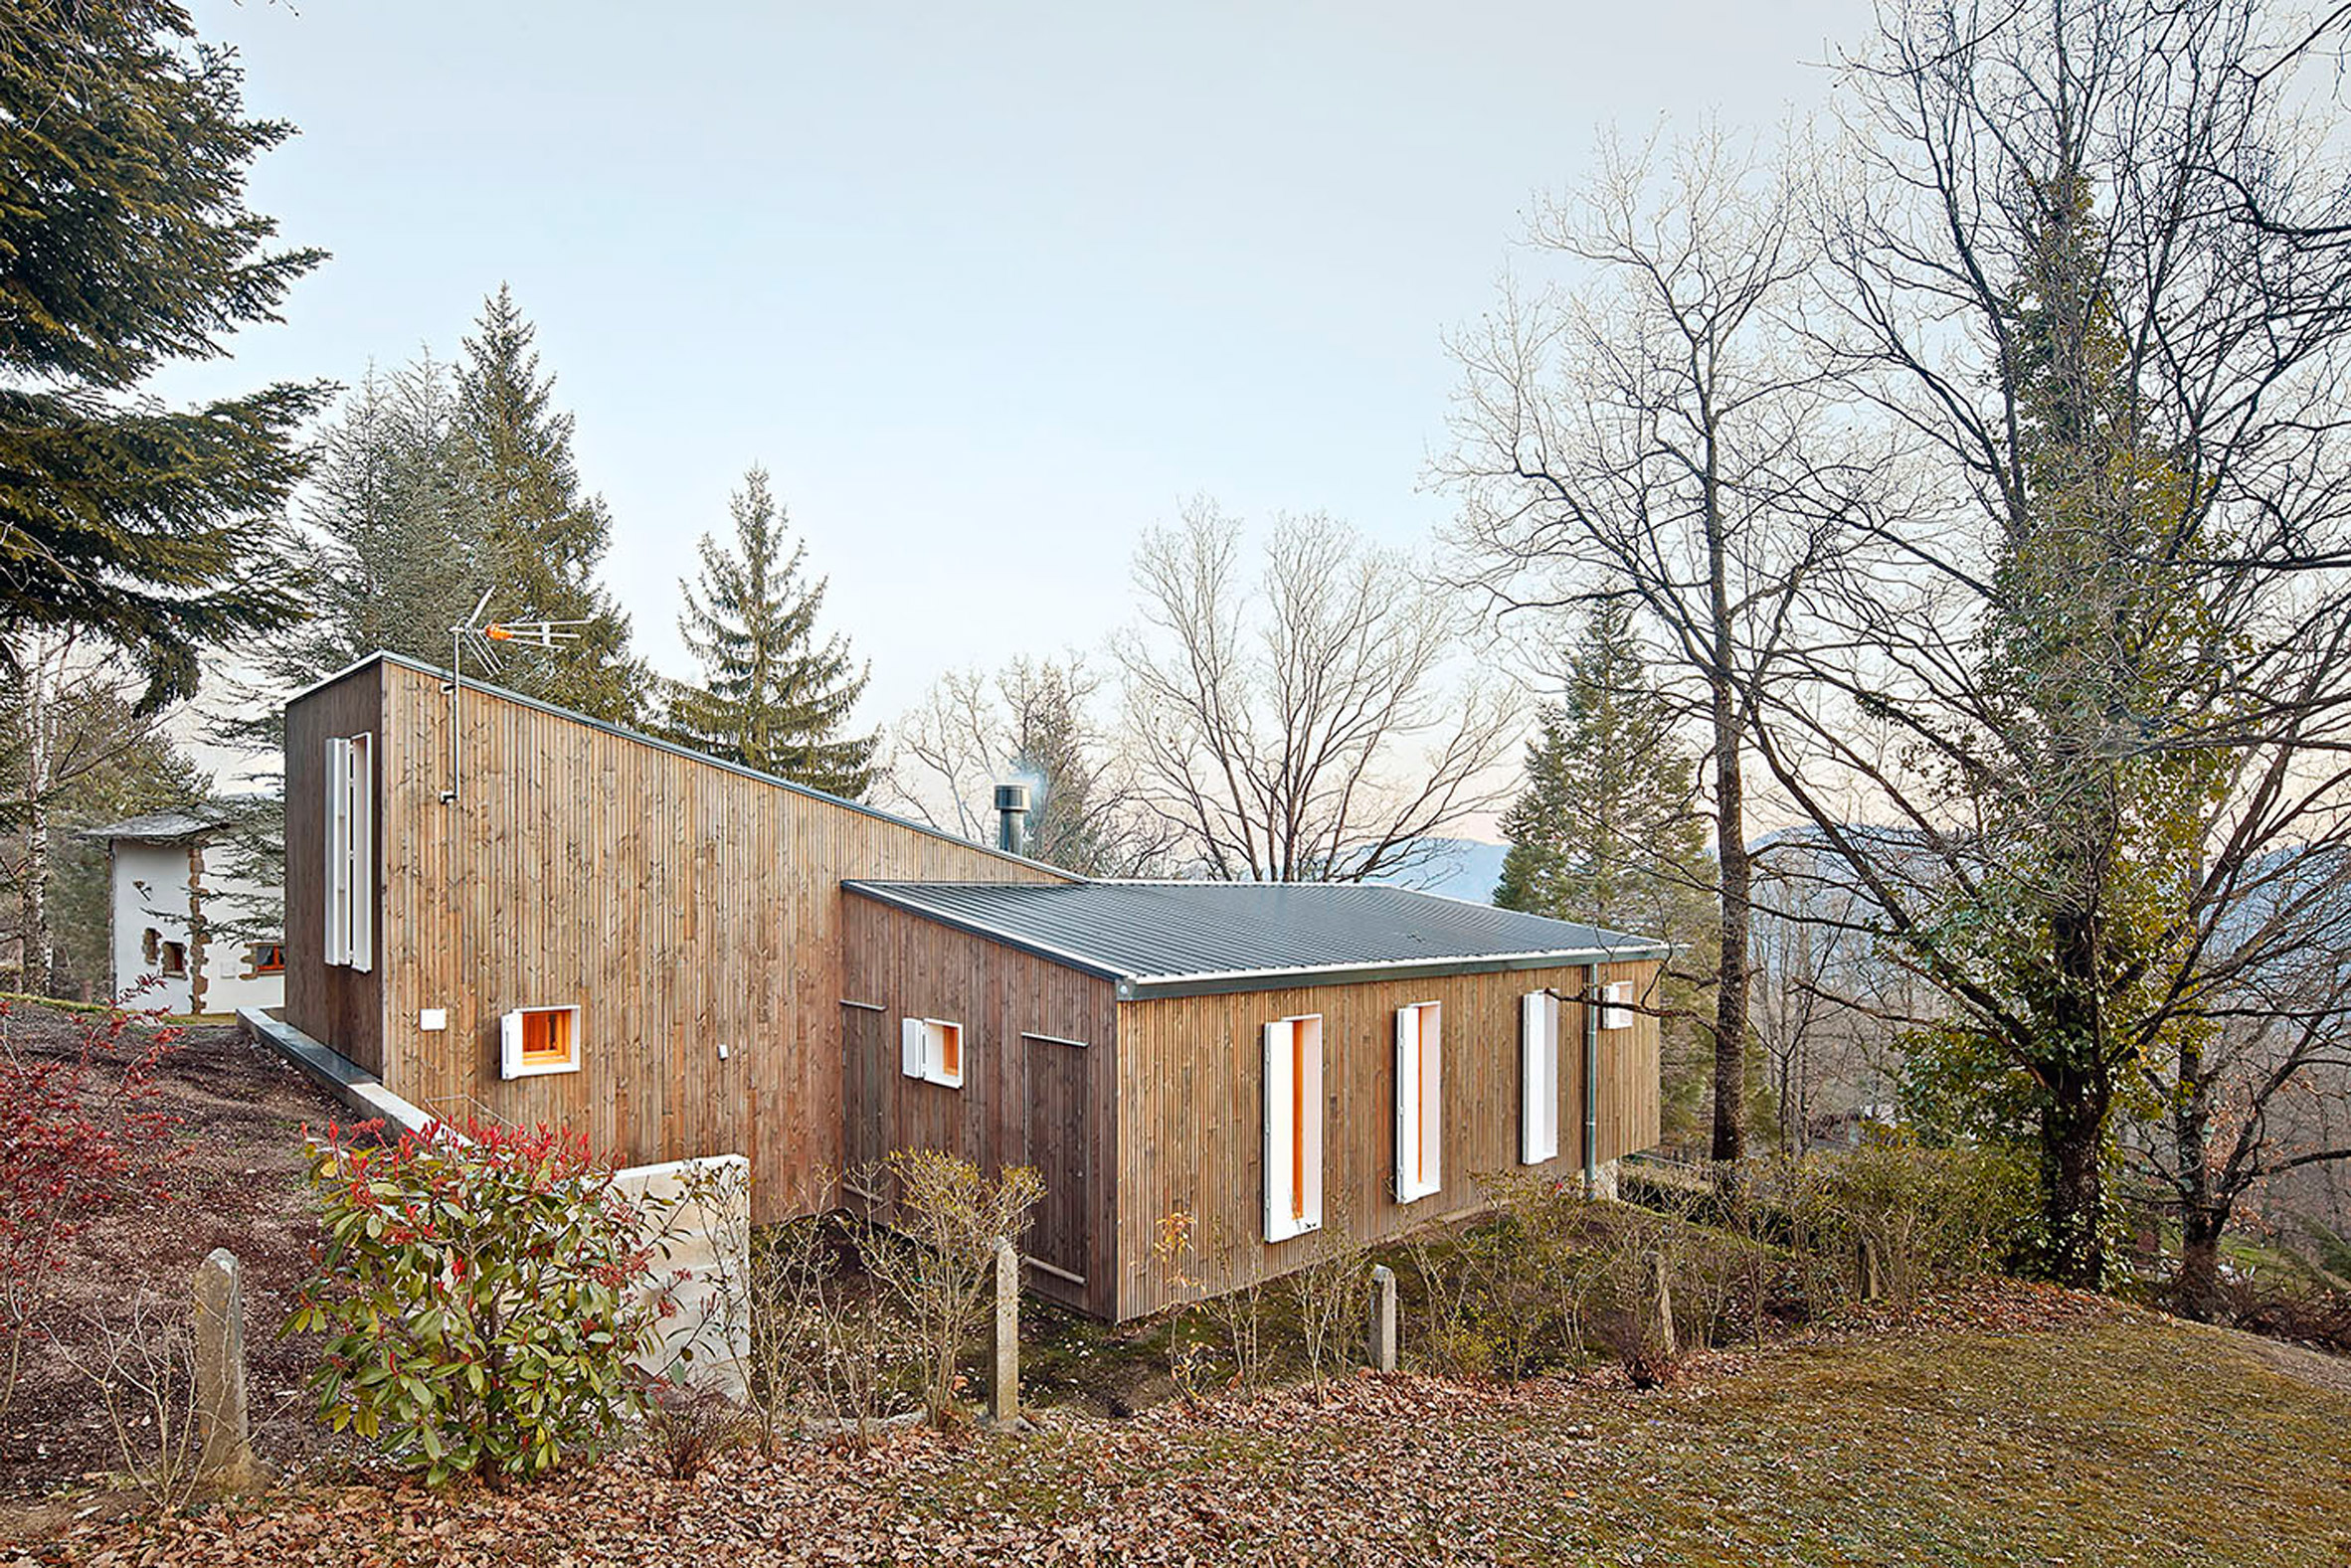 Pine clad was widely used outside and inside the cottage to highlight that it's a forest home